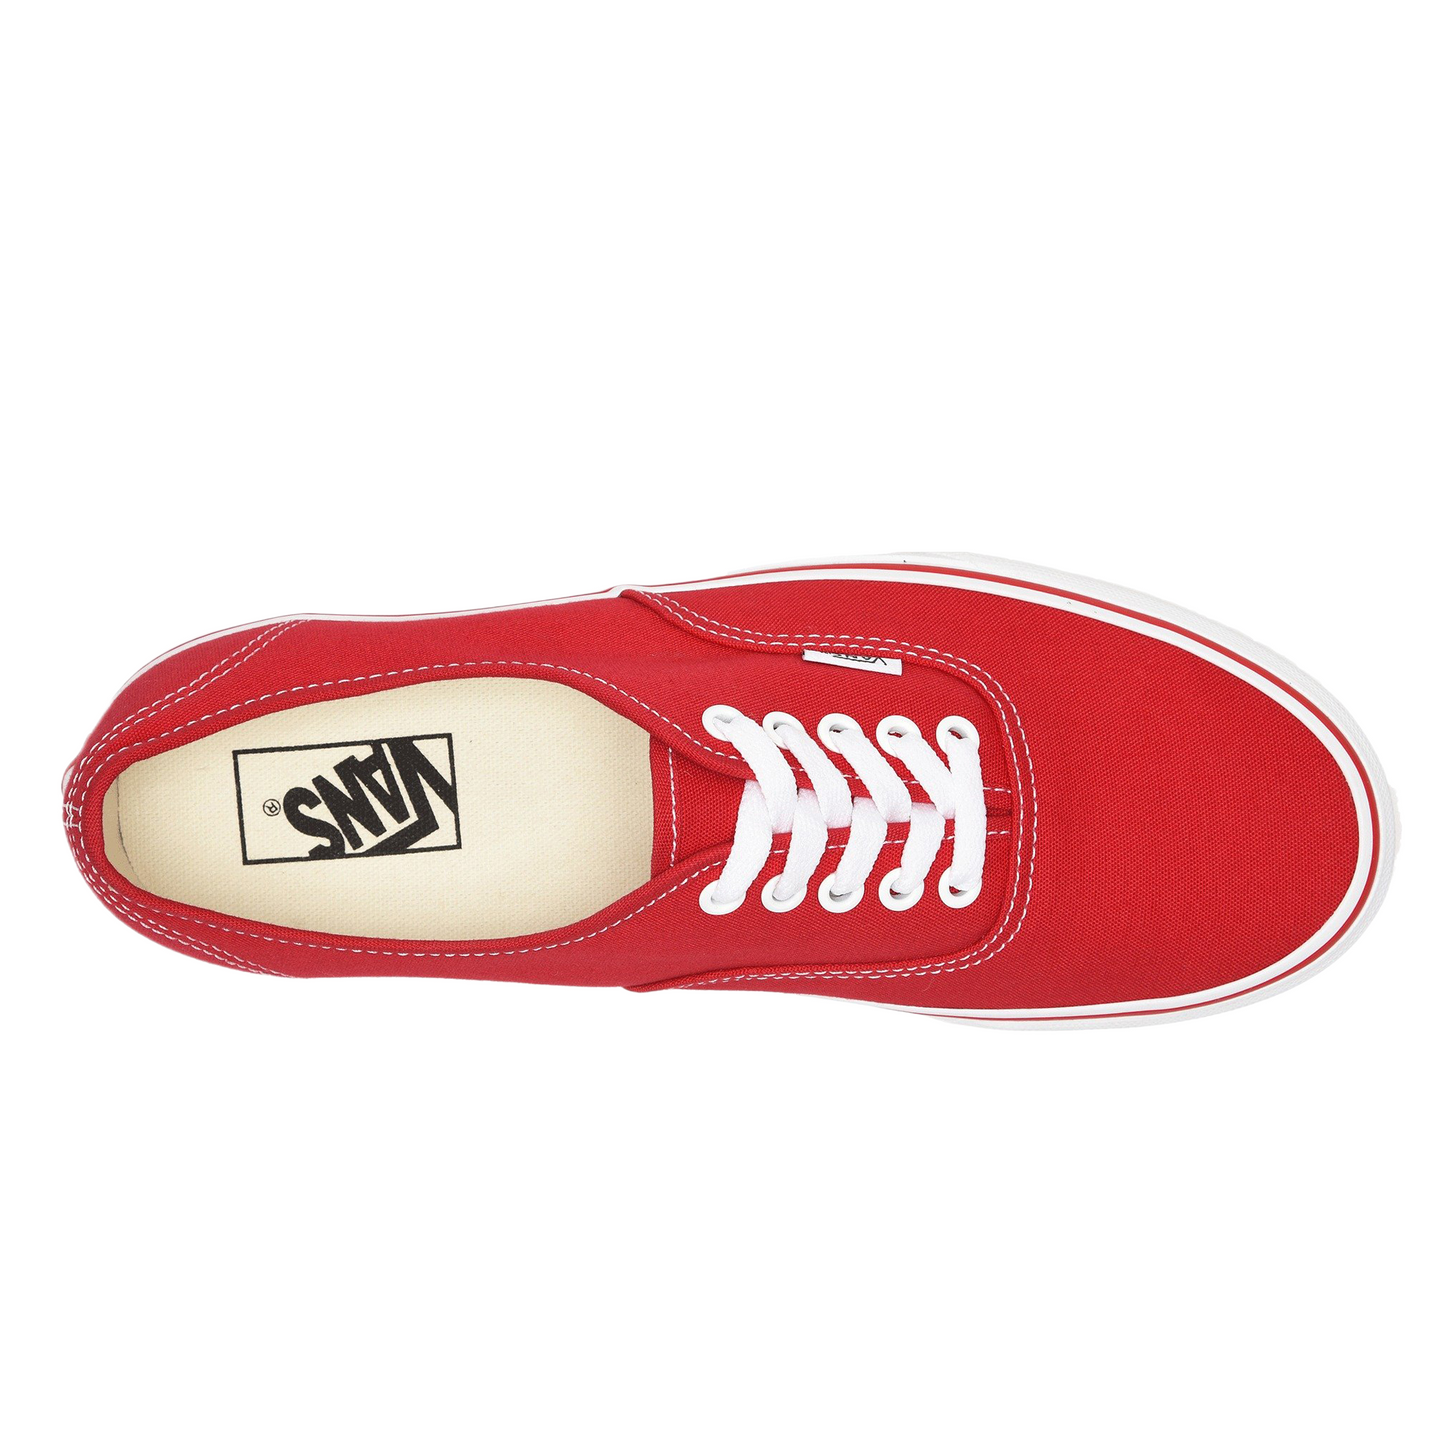 Vans Adult Unisex Authentic Shoes Red VN000EE3RED